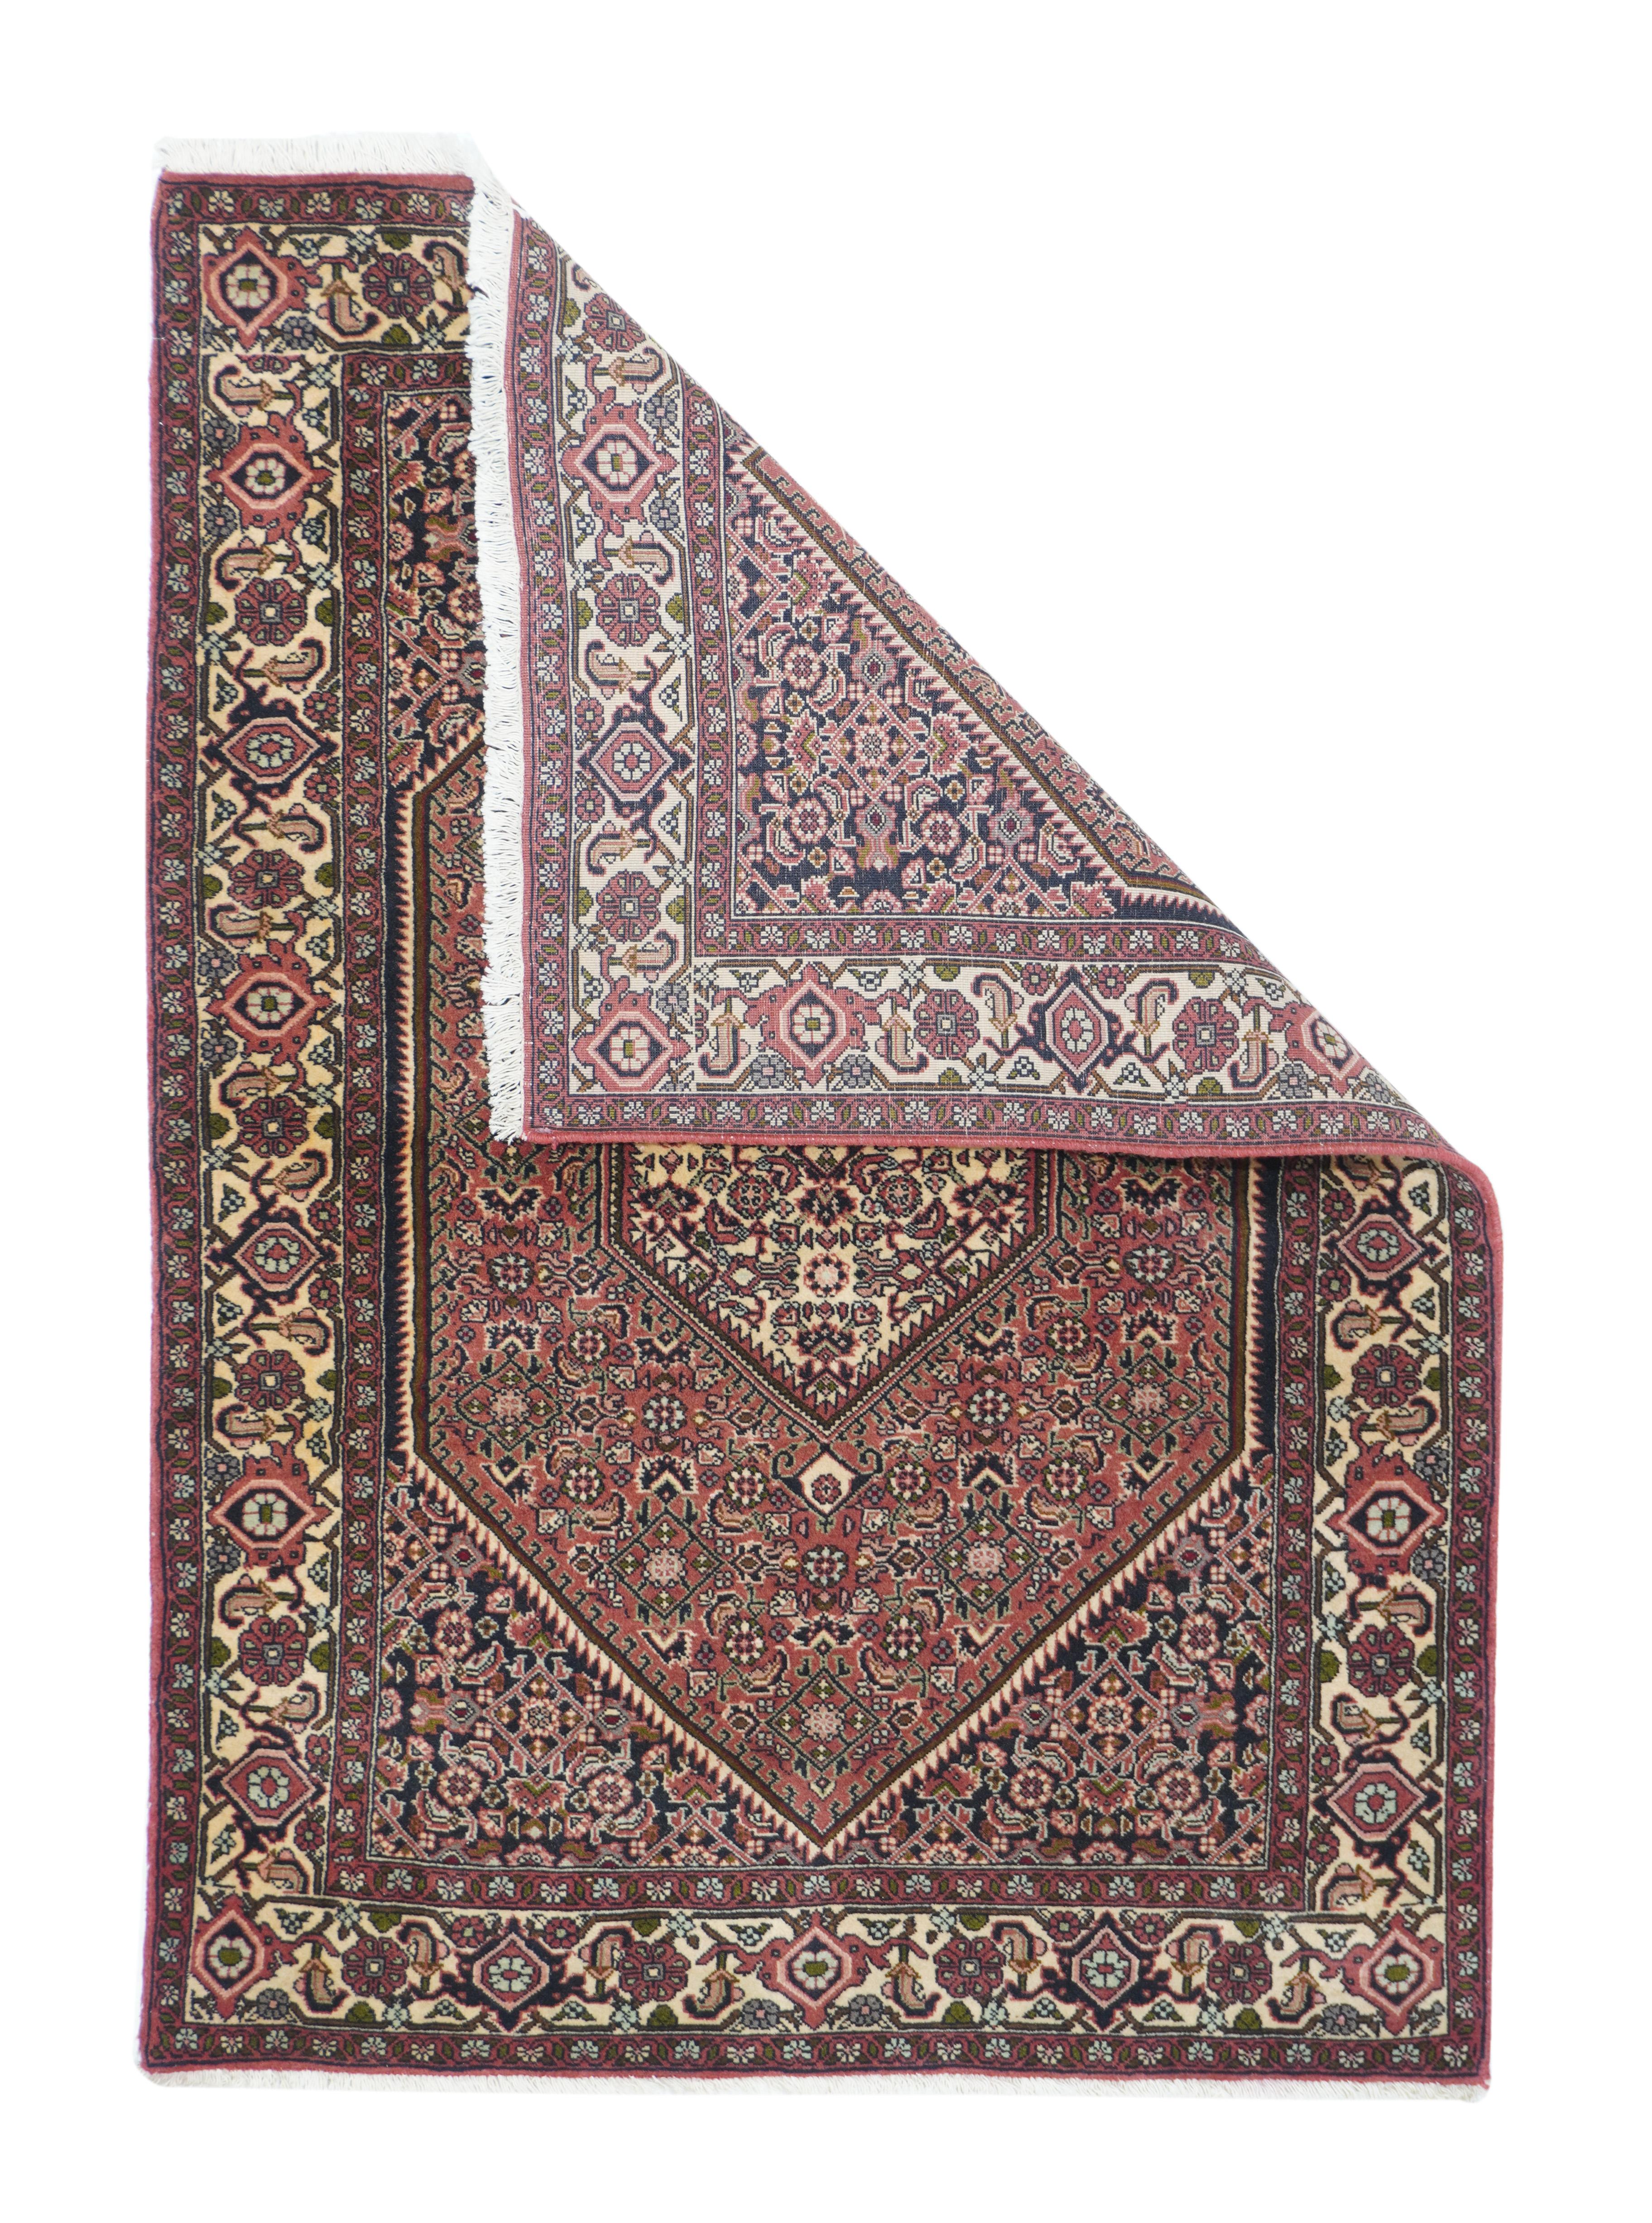 Vintage Bidjar Rug 3'8'' x 5'3''. All Herati field with cream central hexagon, rose sub-field and navy field deploying as stepped triangular corners. A balanced strip style border of reversing layered turtles and intervening rosettes. Medium, very